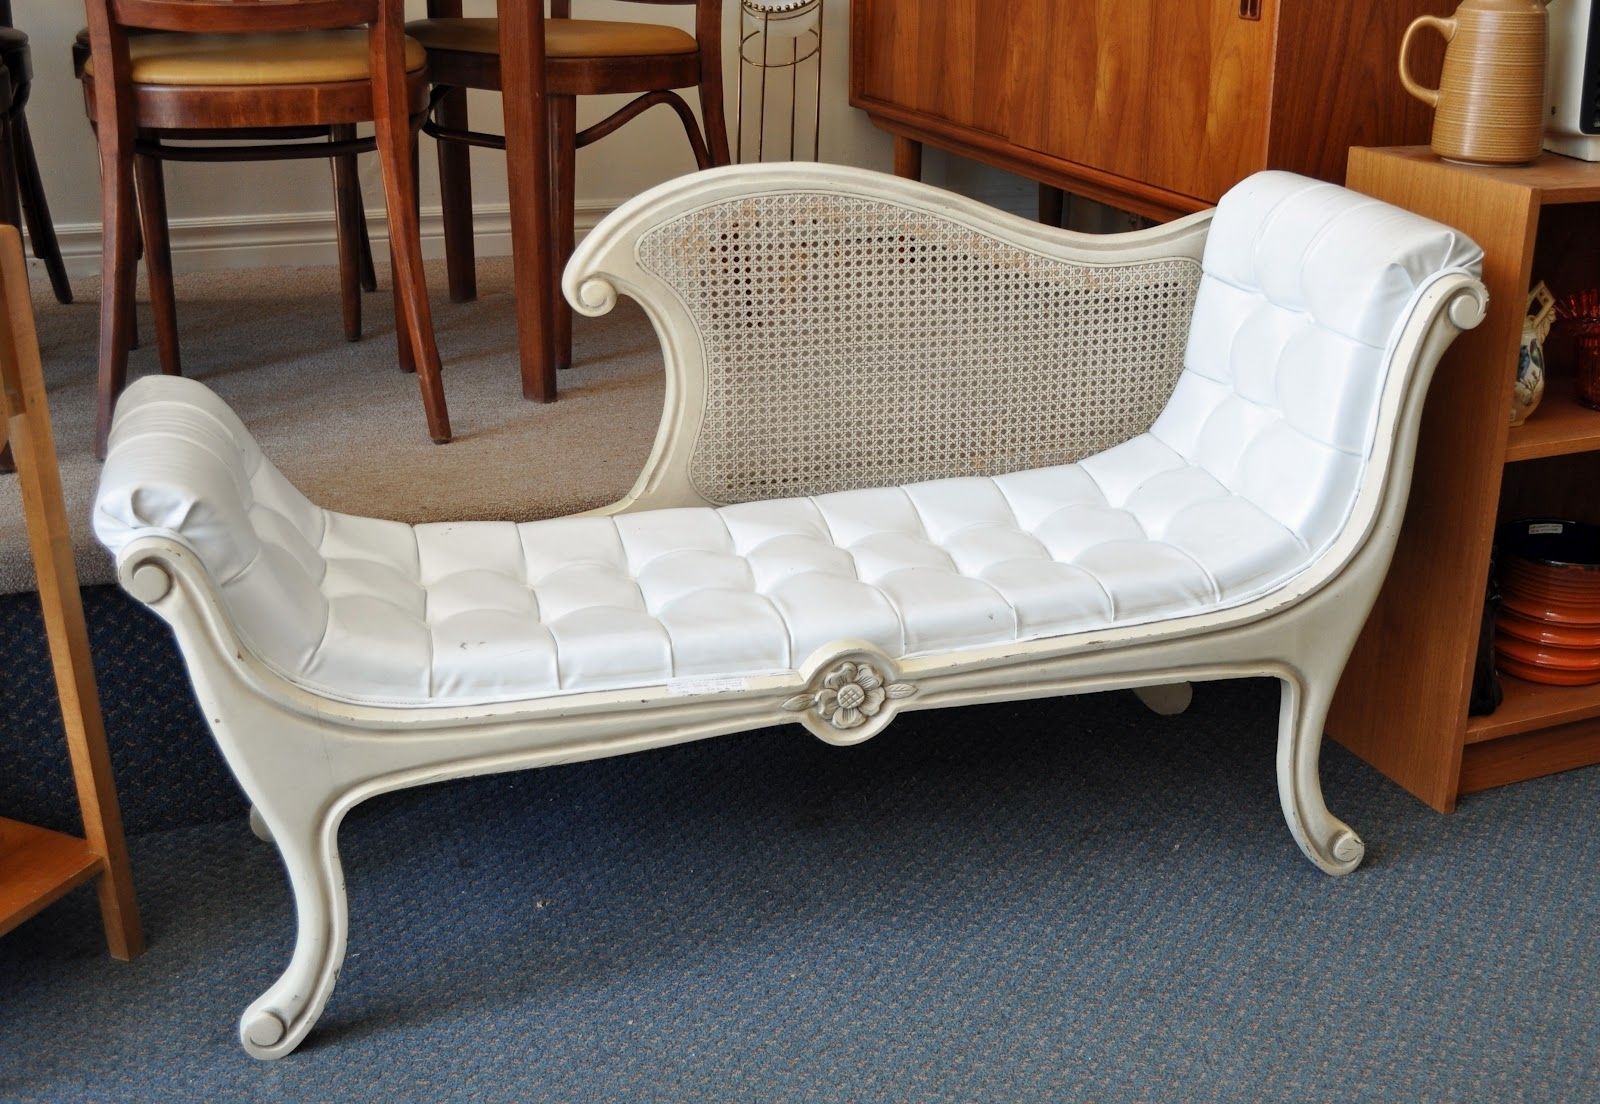 Victorian Chaise Lounge Styles Intended For Popular Victorian Chaise Lounge Chairs (View 15 of 15)